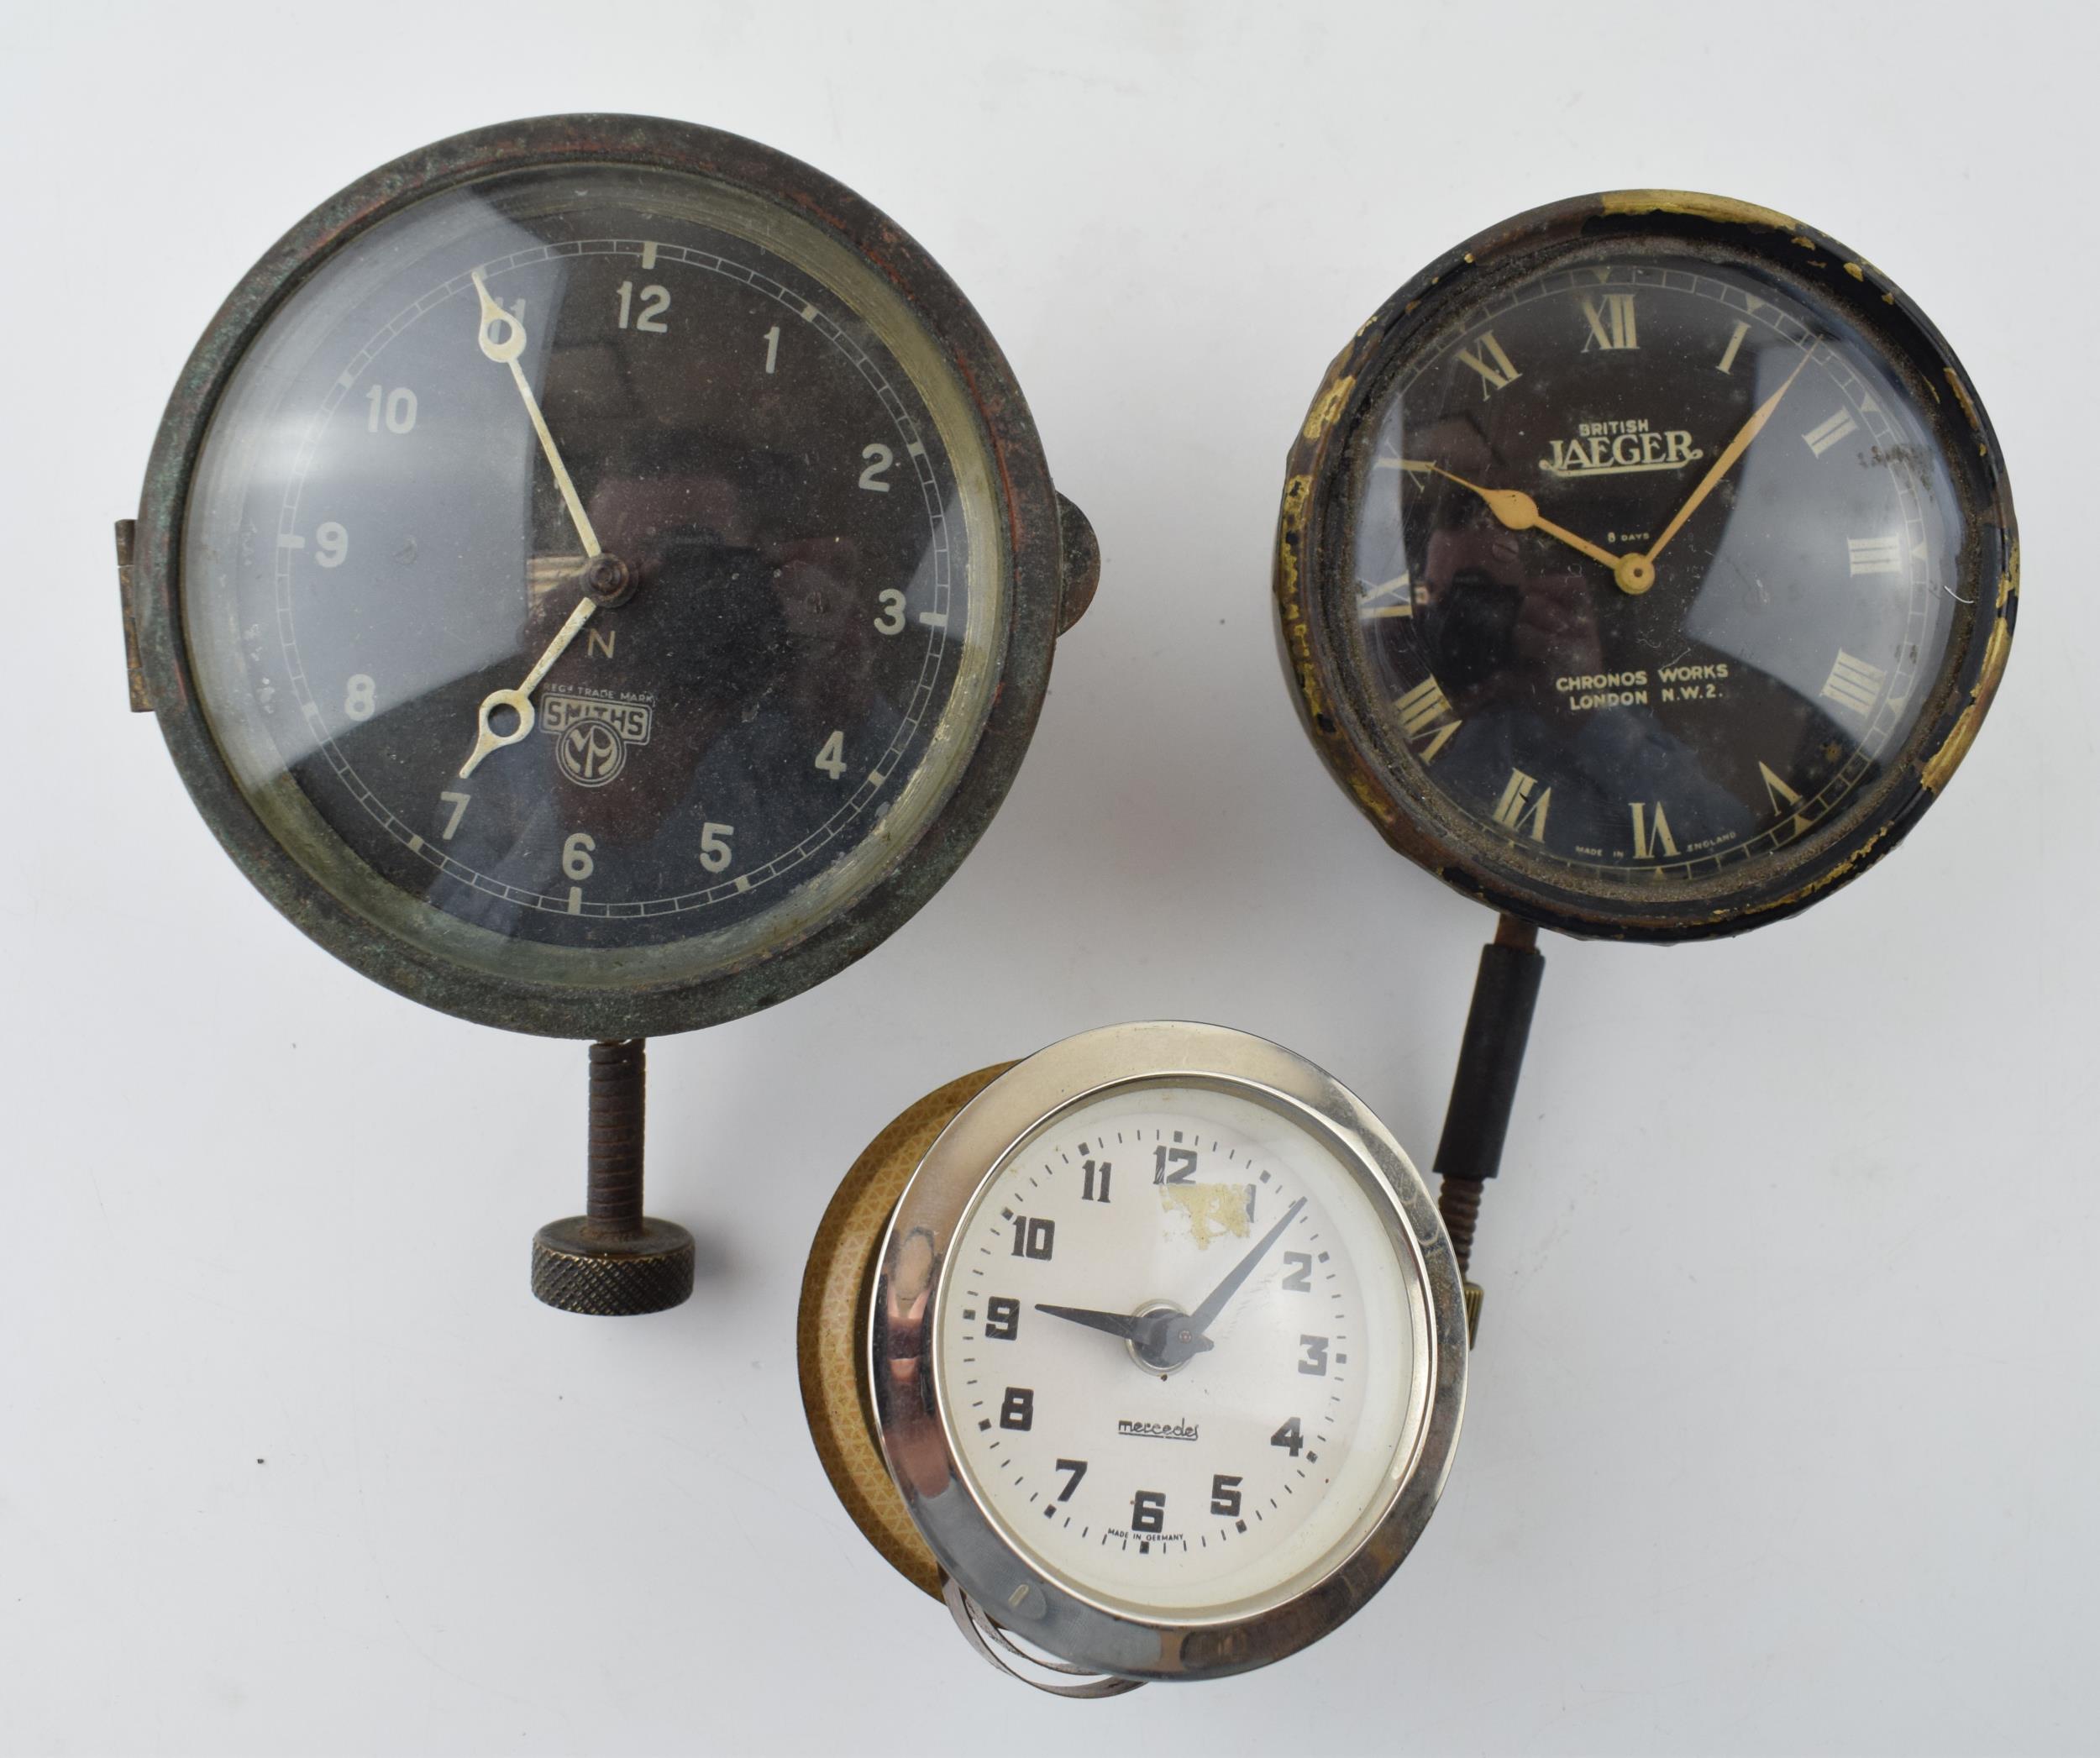 A collection of car clocks to include examples by Smiths, Jaeger and Mercedes. (3) All wind and